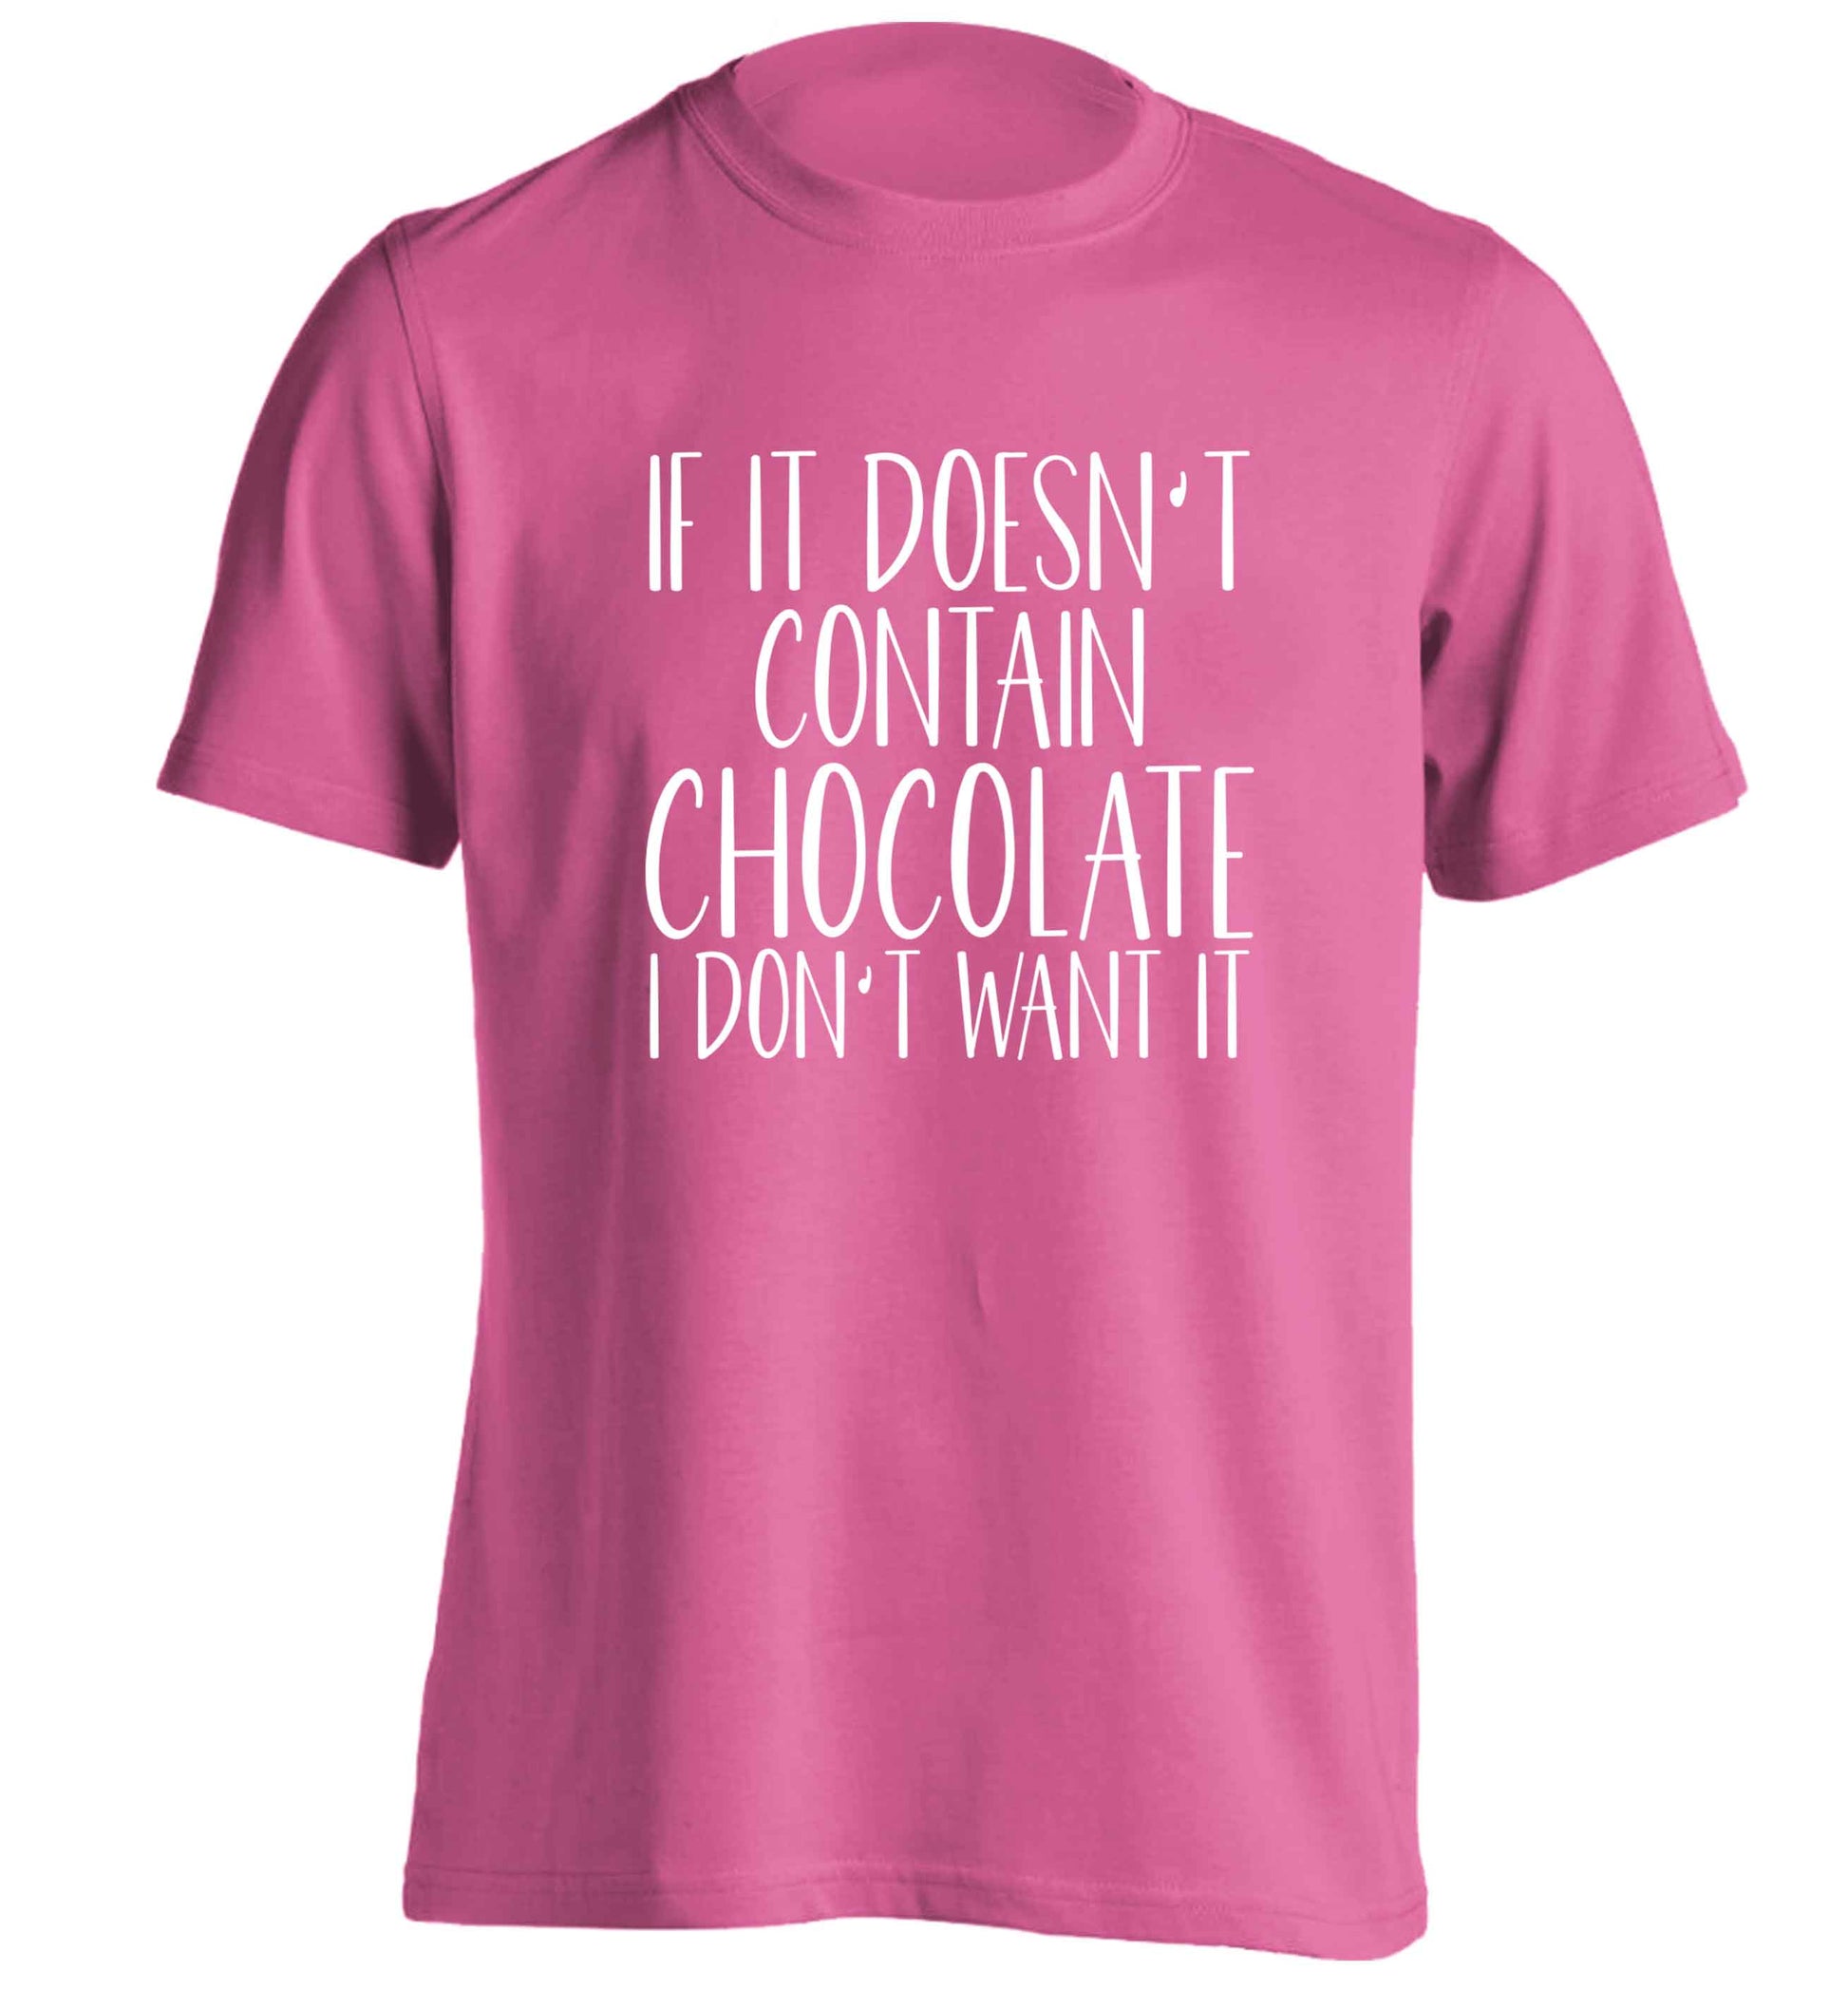 If it doesn't contain chocolate I don't want it adults unisex pink Tshirt 2XL